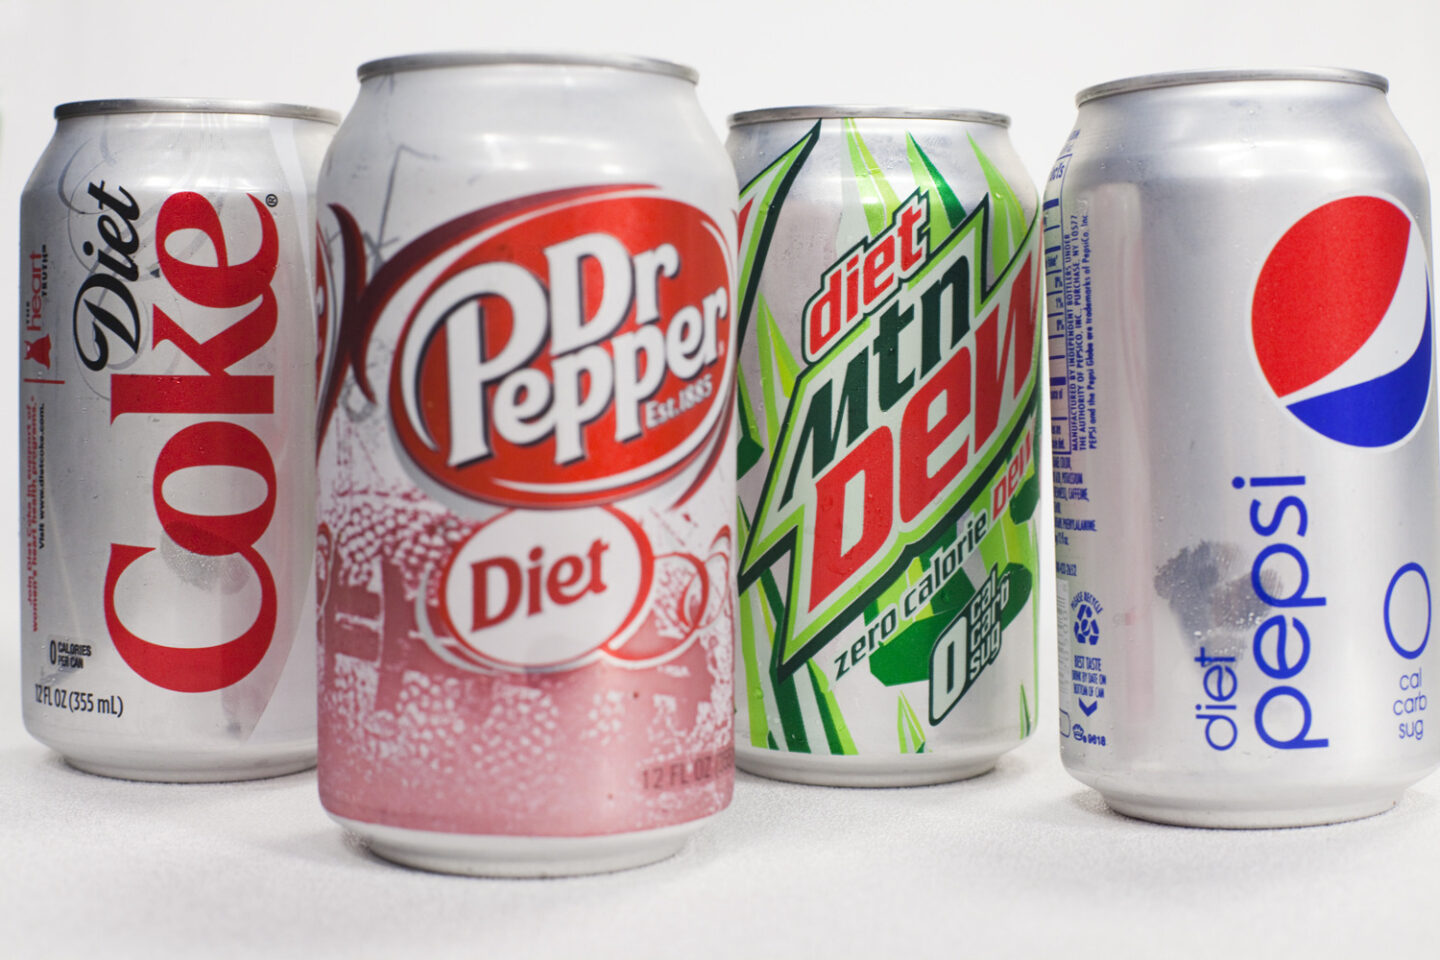 Are You a Soda Drinker? If so, read this.